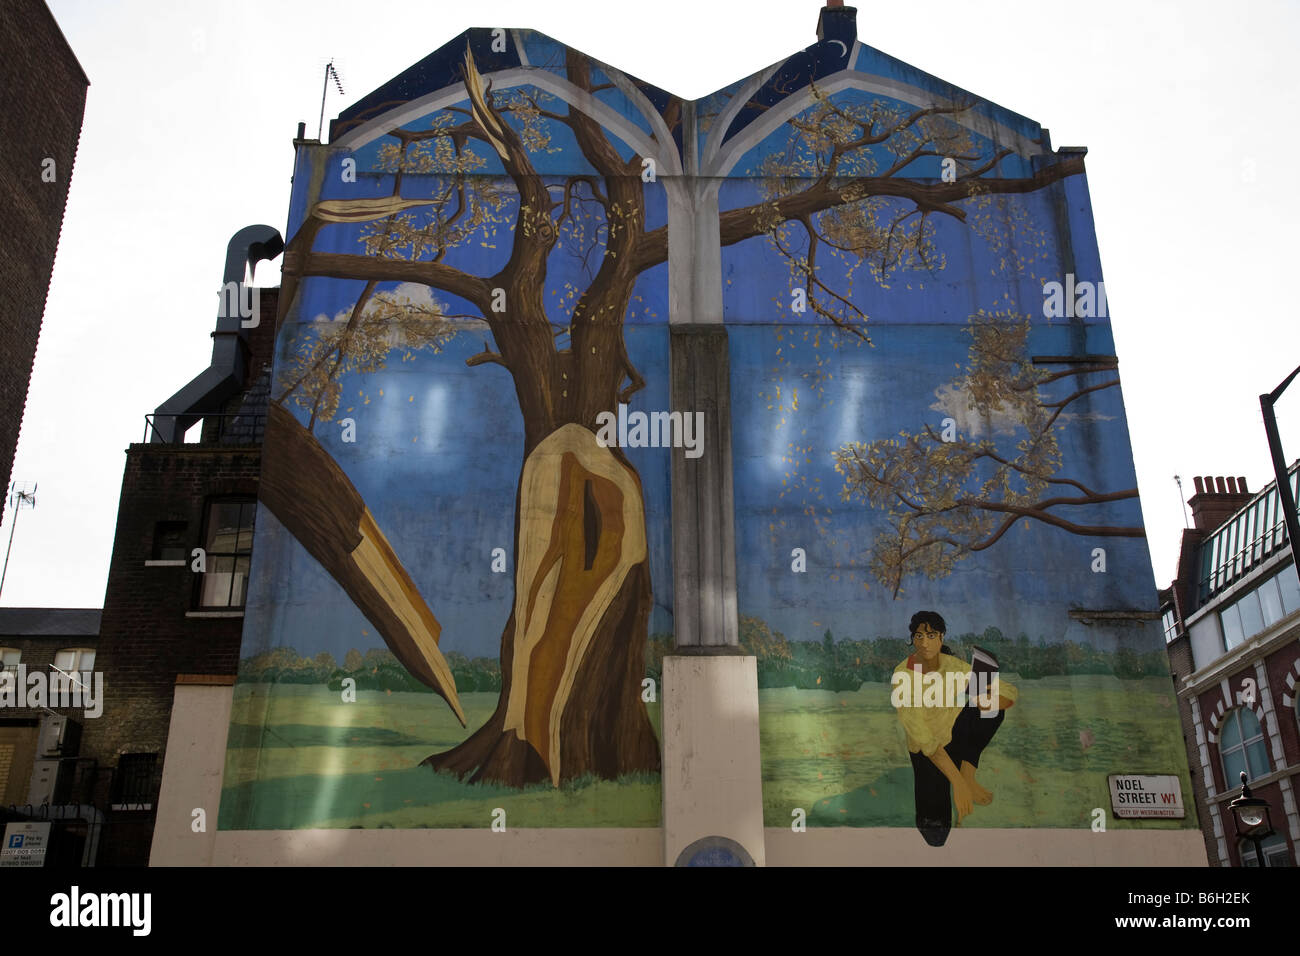 The Soho mural 'Ode to the west wind' by Louise Vines, Soho, London, England. Stock Photo